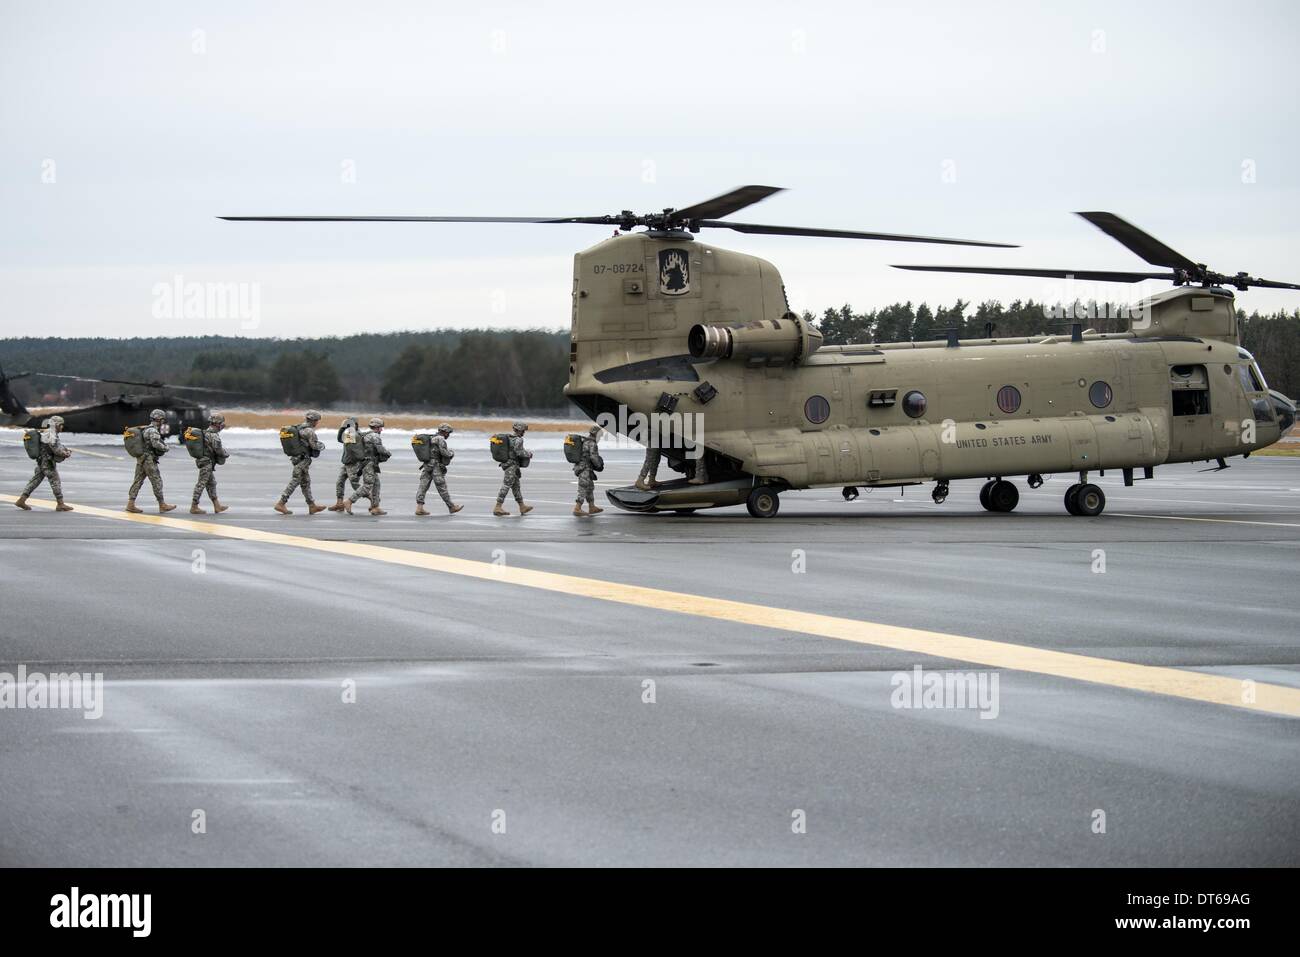 Grafenwoehr, Germany. 10th Feb, 2014. Soldiers of the US Army enter a Boeing CH-47 Chinook helicopter at the training area in Grafenwoehr, Germany, 10 February 2014. About 350 soldiers jumped from about 330 meters above sea level from a military helicopter. The training prepares the 173rd Airborne Brigade for further operations. The unit has already been employed in the war zones in Iraq and Afghanistan. Photo: ARMIN WEIGEL/dpa/Alamy Live News Stock Photo